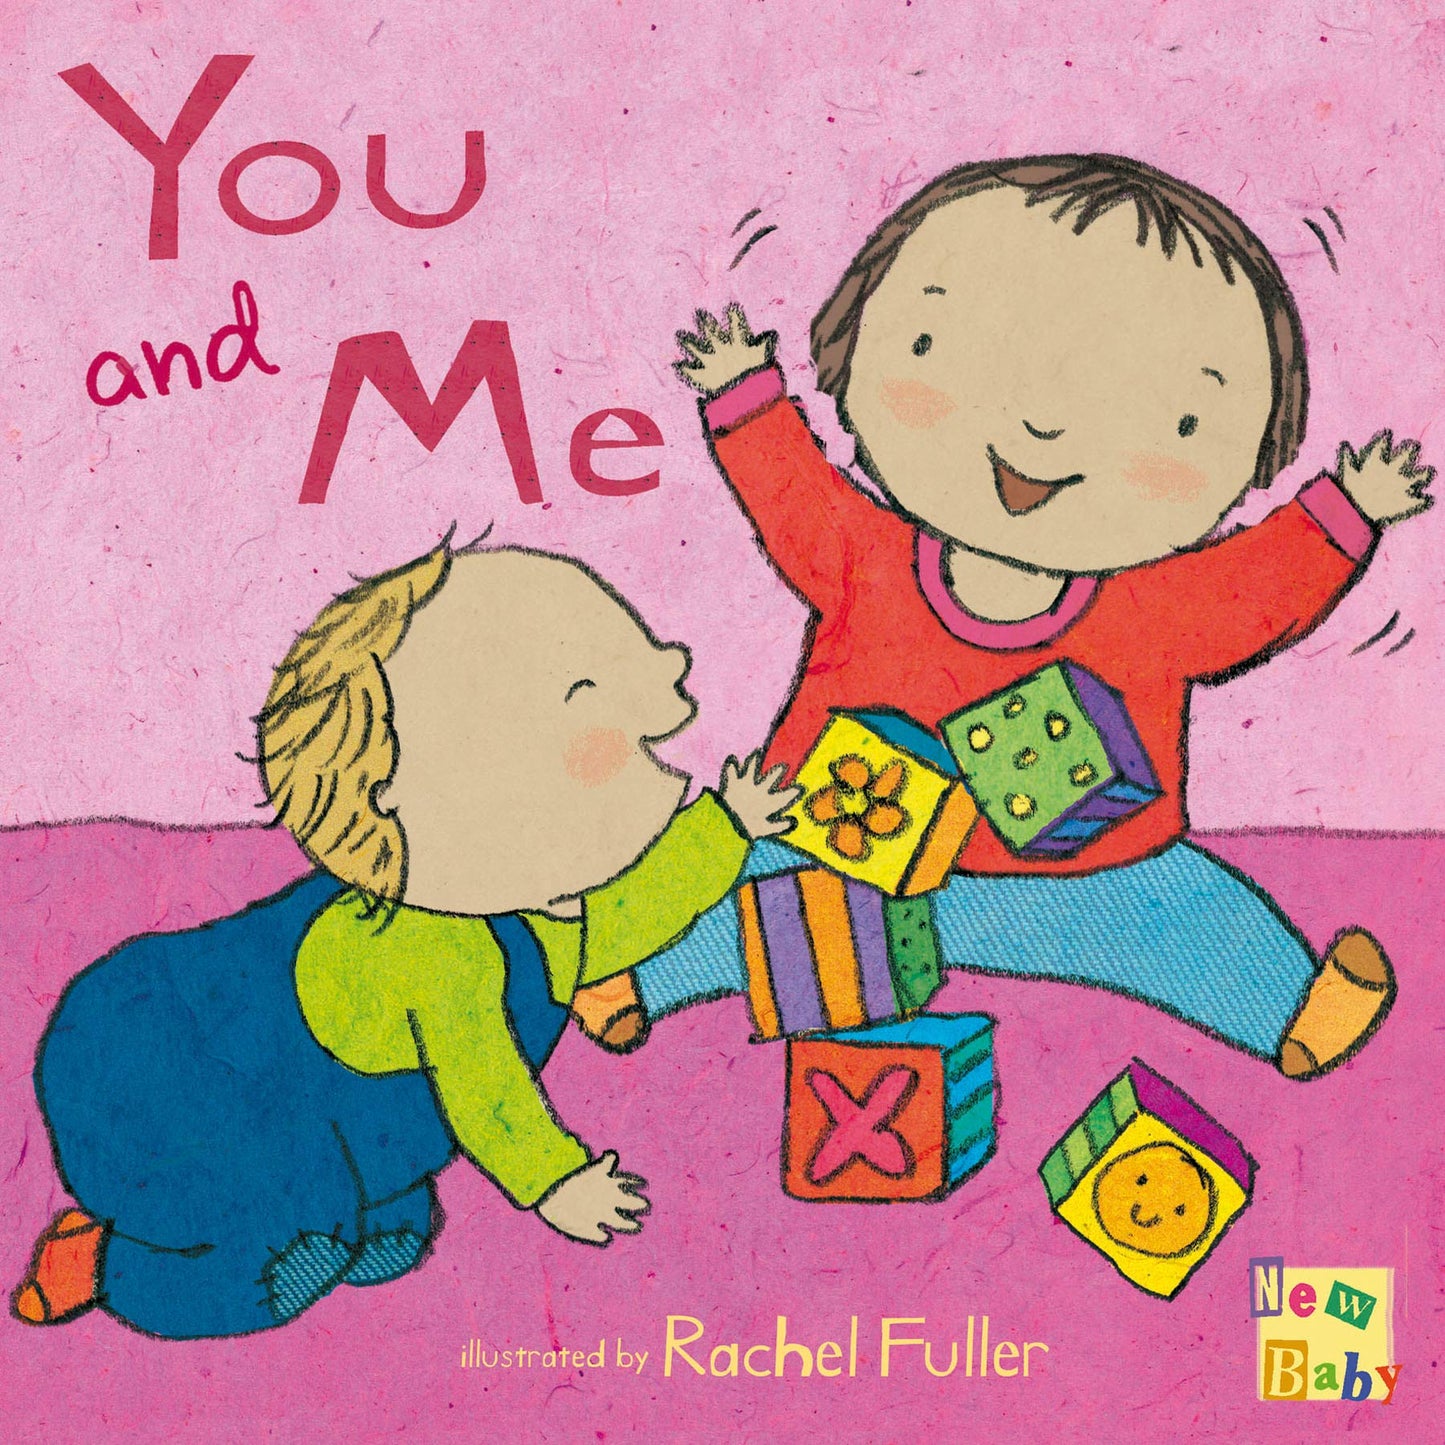 Book: You and Me (Final Sale)